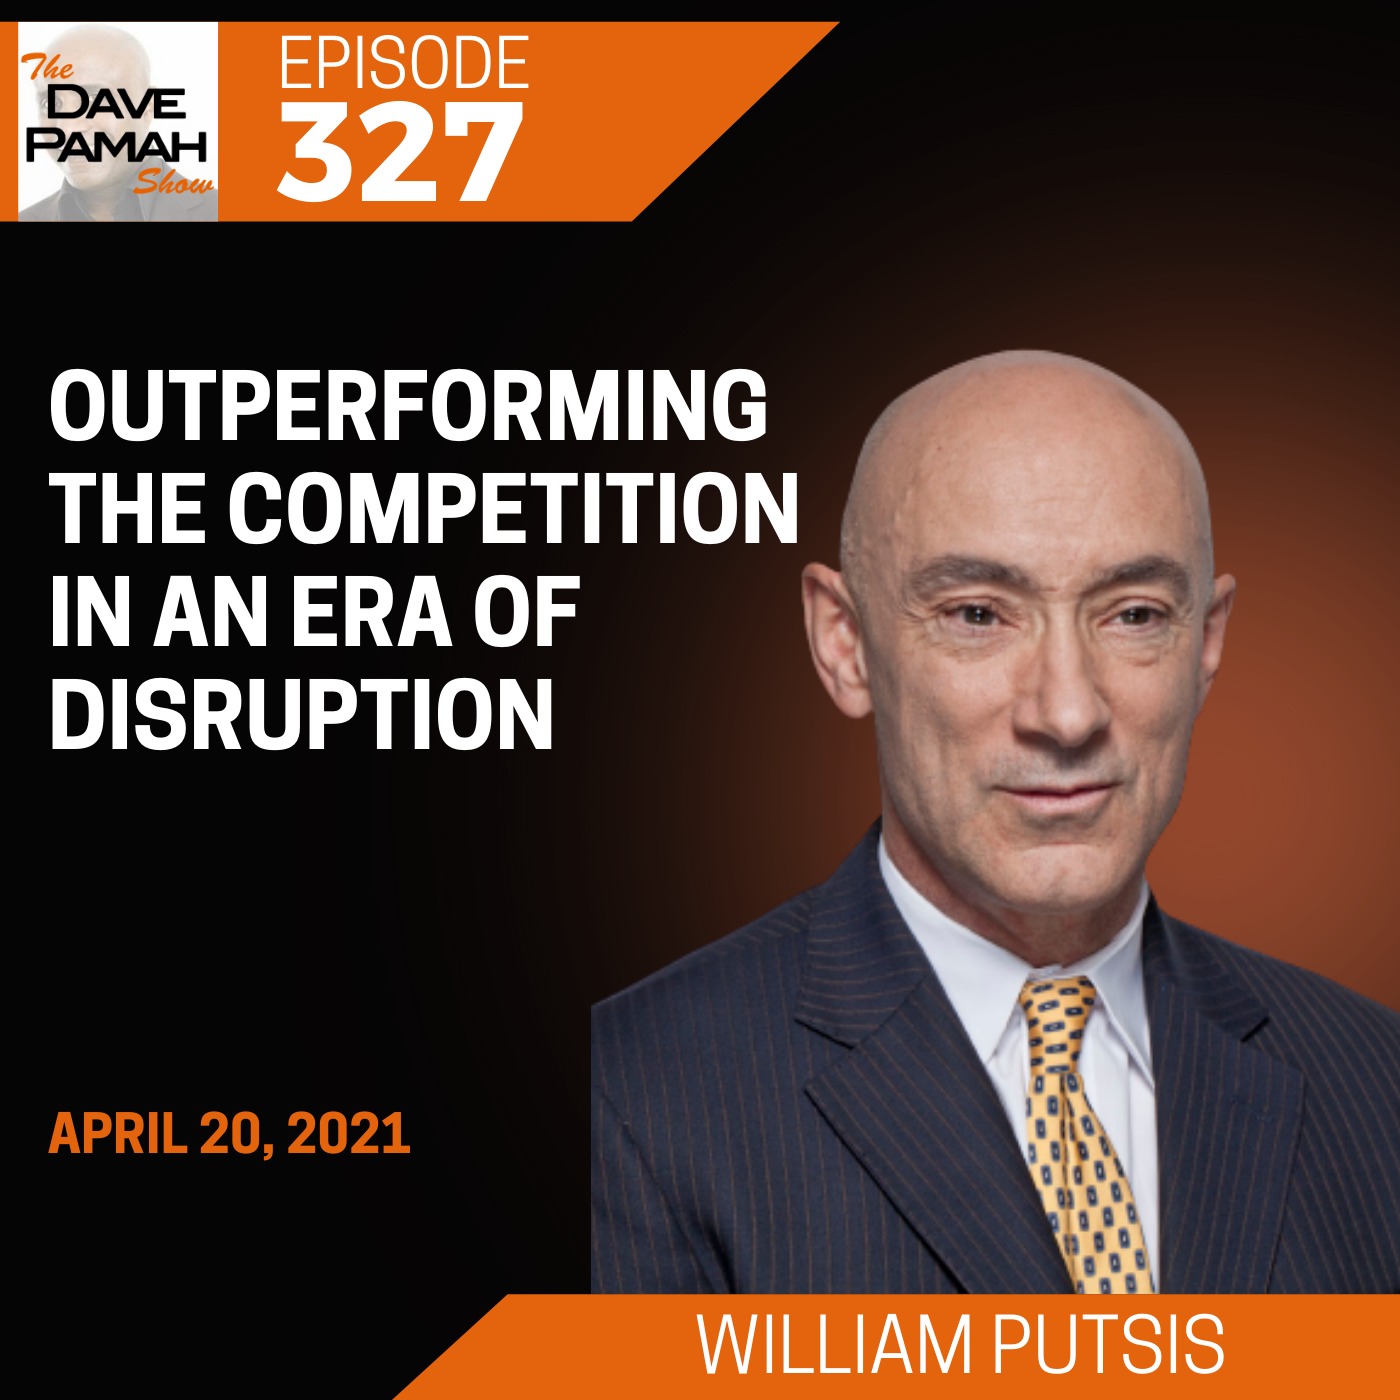 Outperforming the Competition in an Era of Disruption with William Putsis